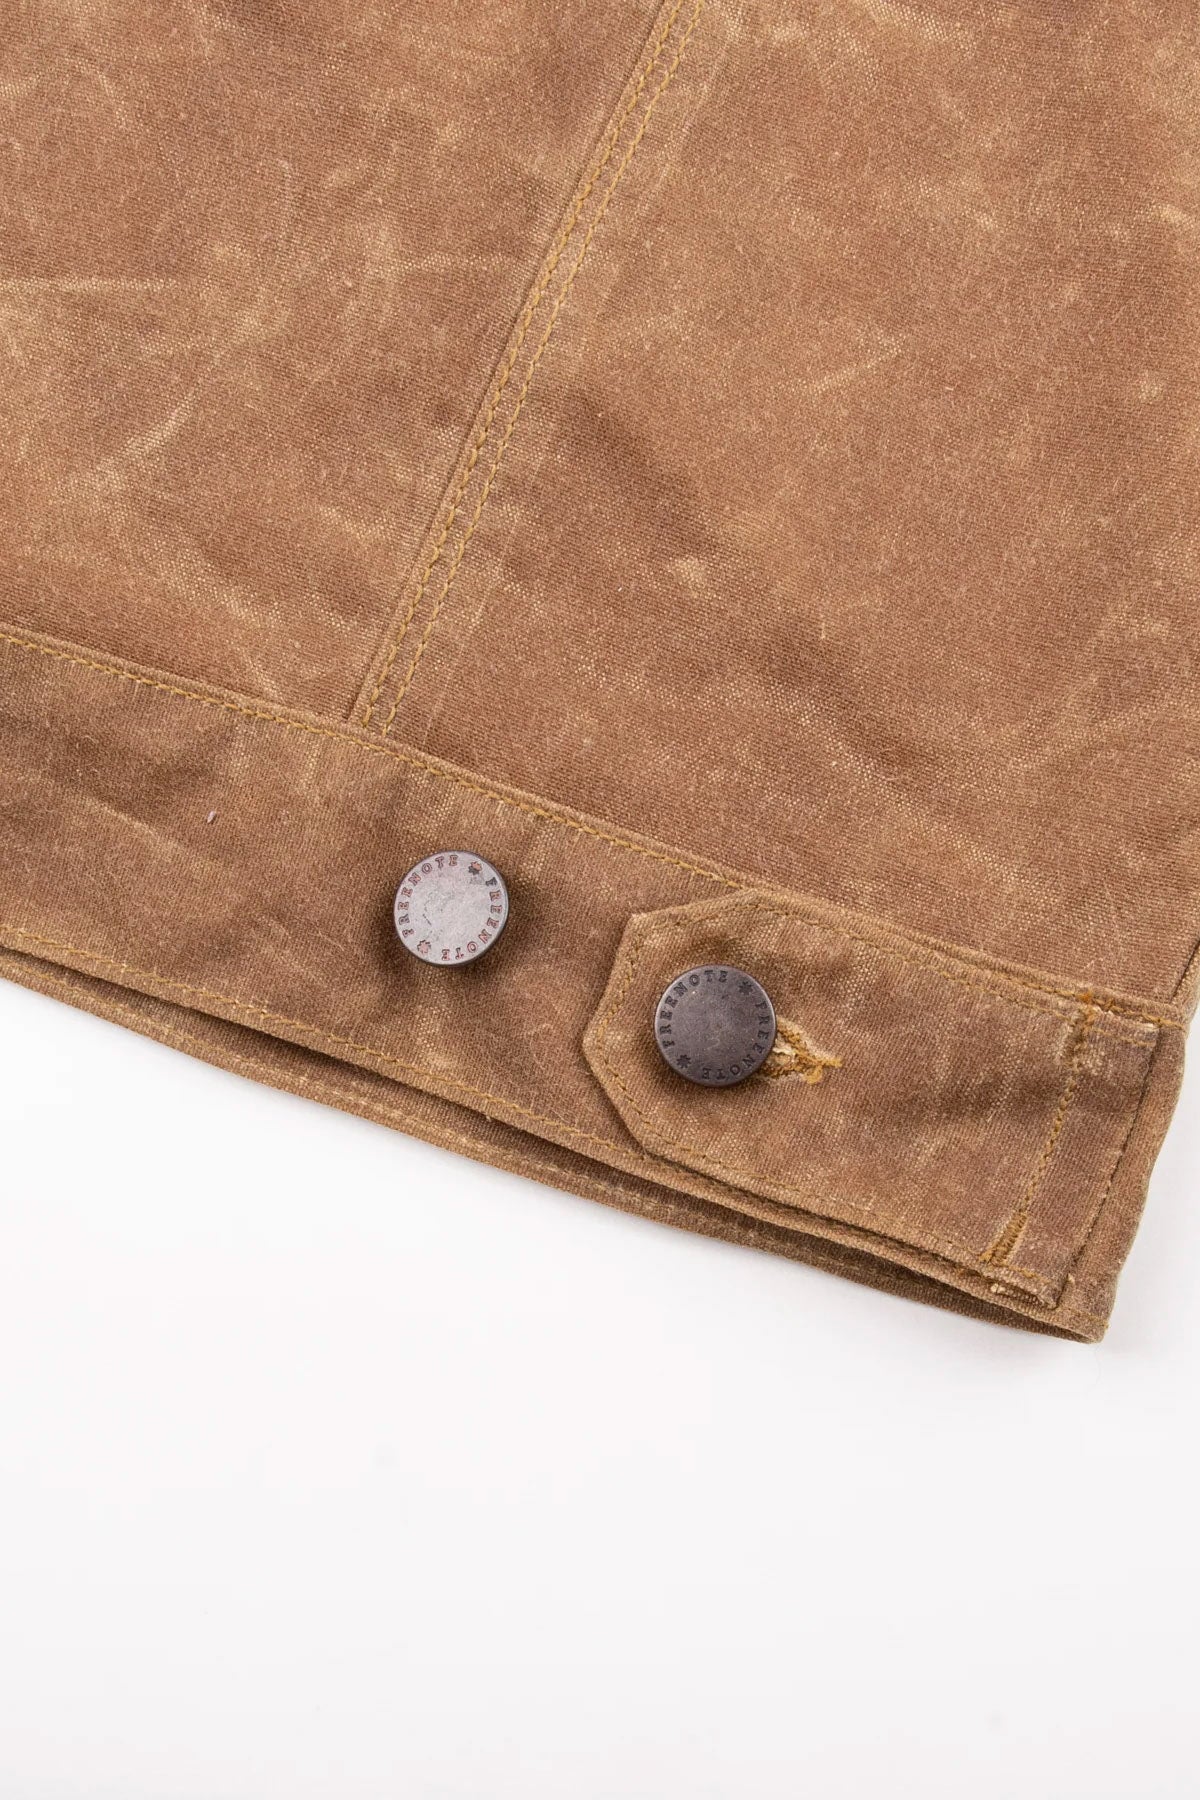 Freenote Cloth - Riders Jacket Waxed Canvas in Rust